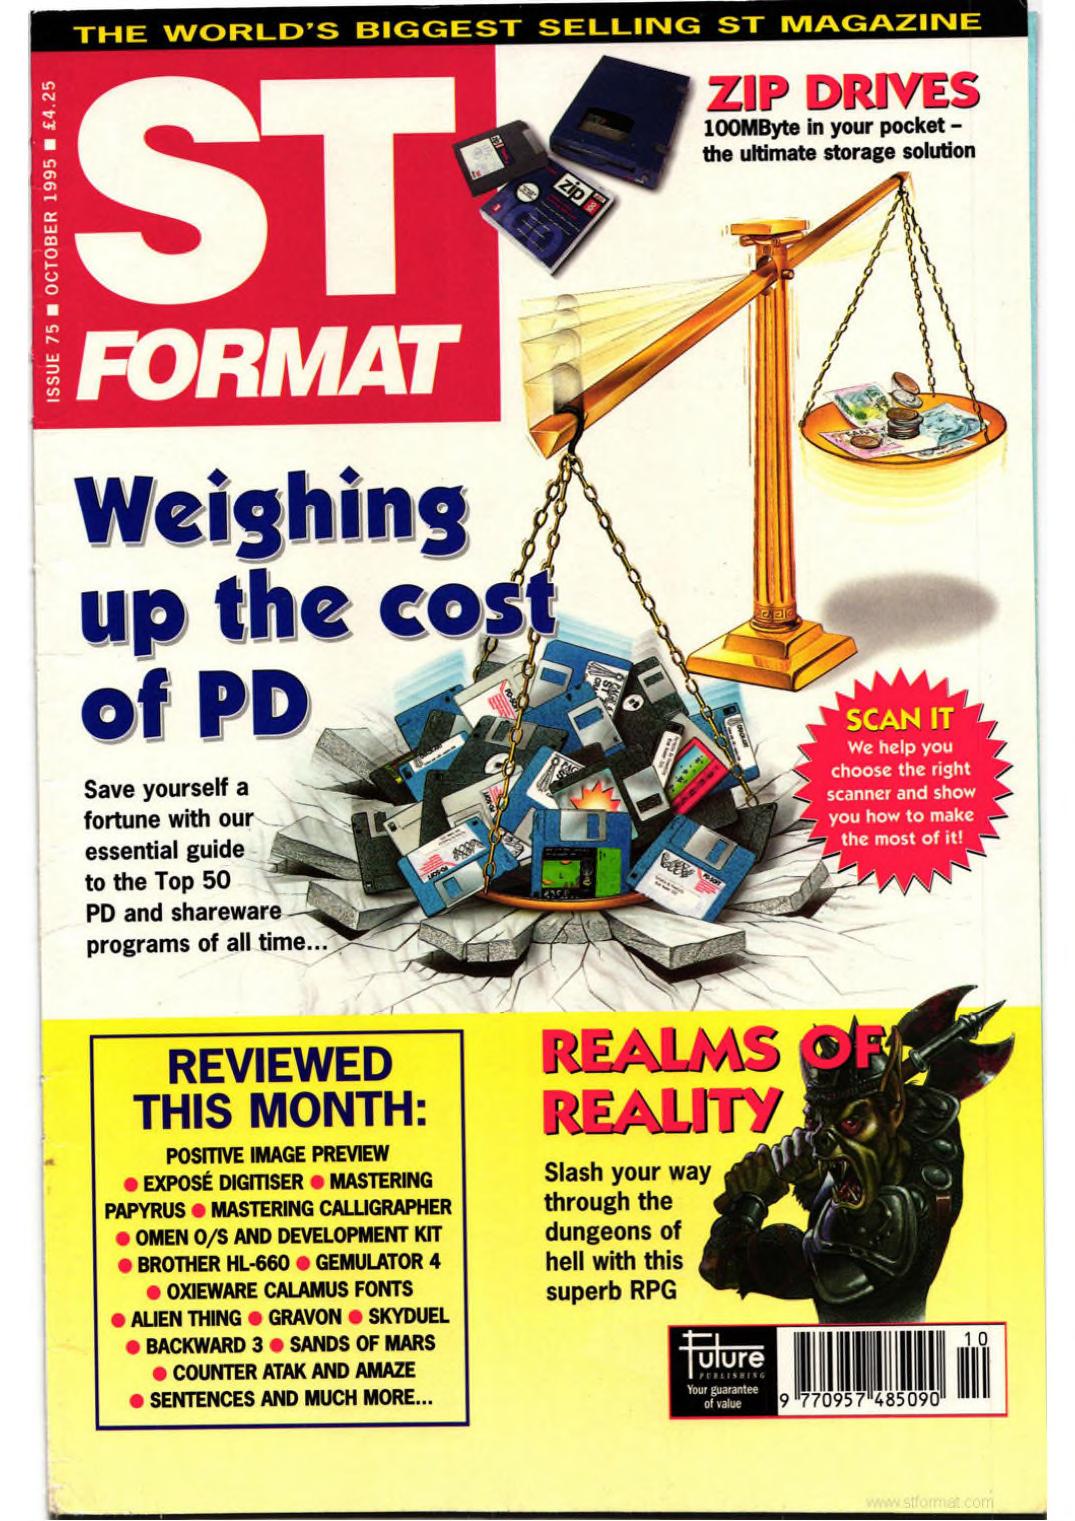 Cover for ST Format 75 (Oct 1995)